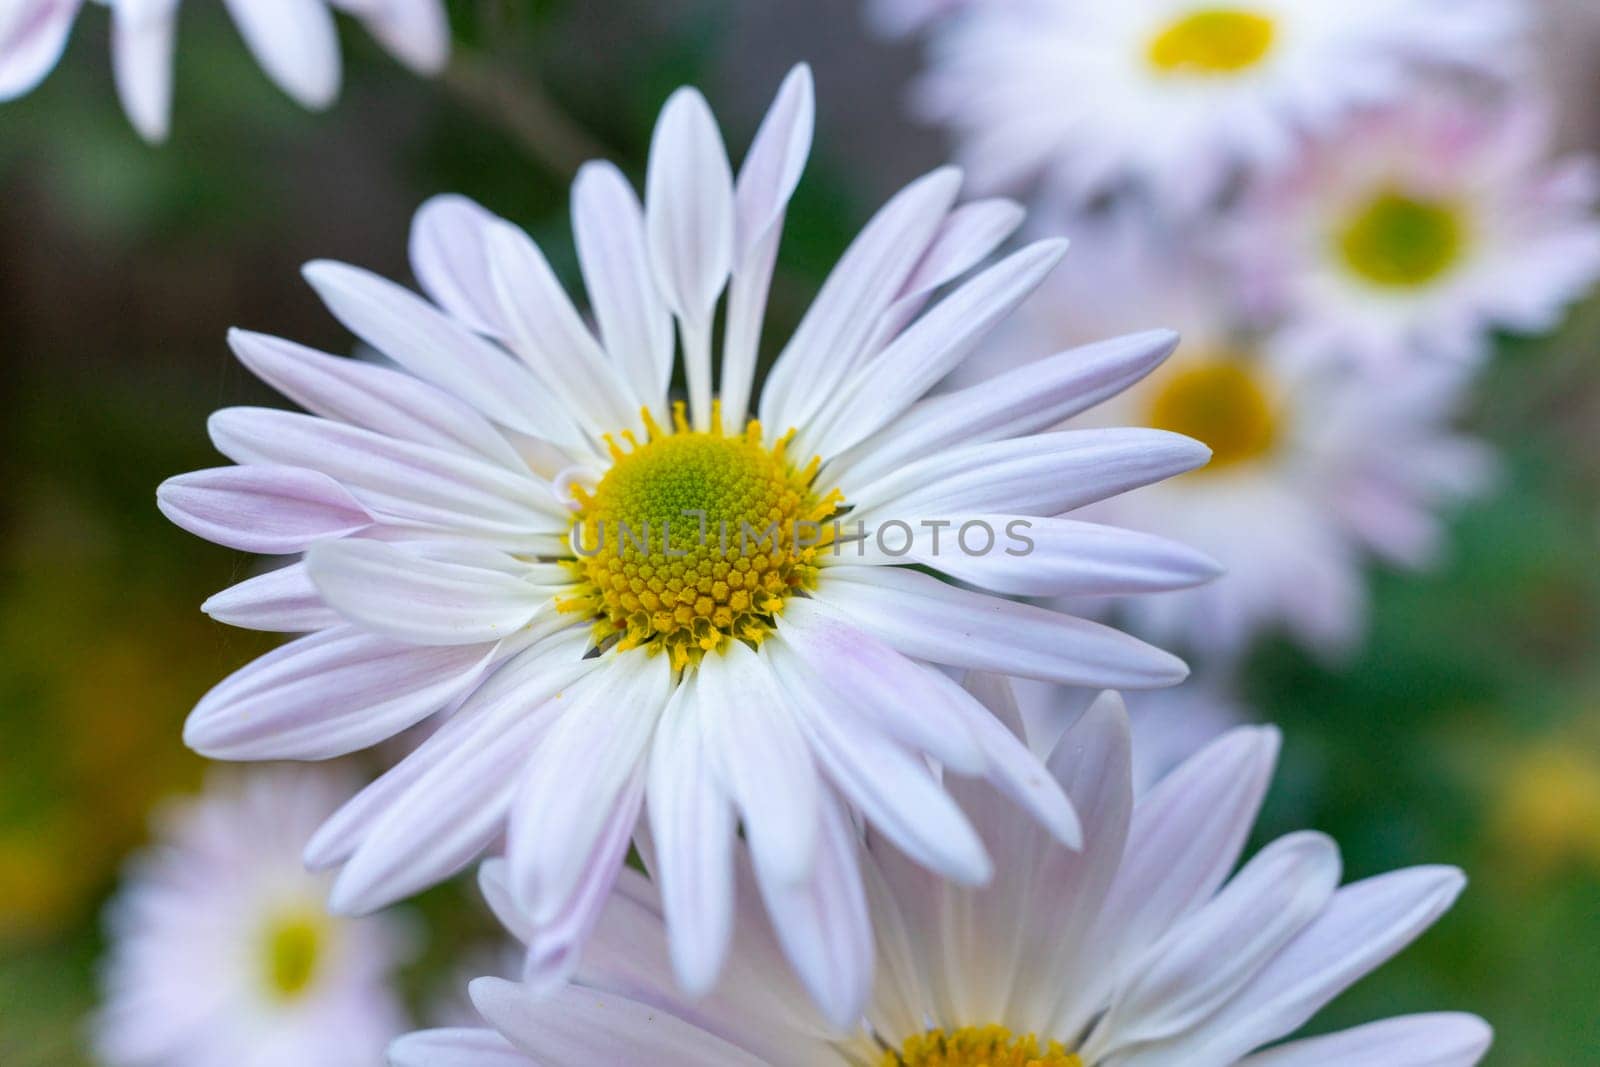 White flower close-up on the background of other flowers. Big white daisy. Soft focus, shallow depth of field